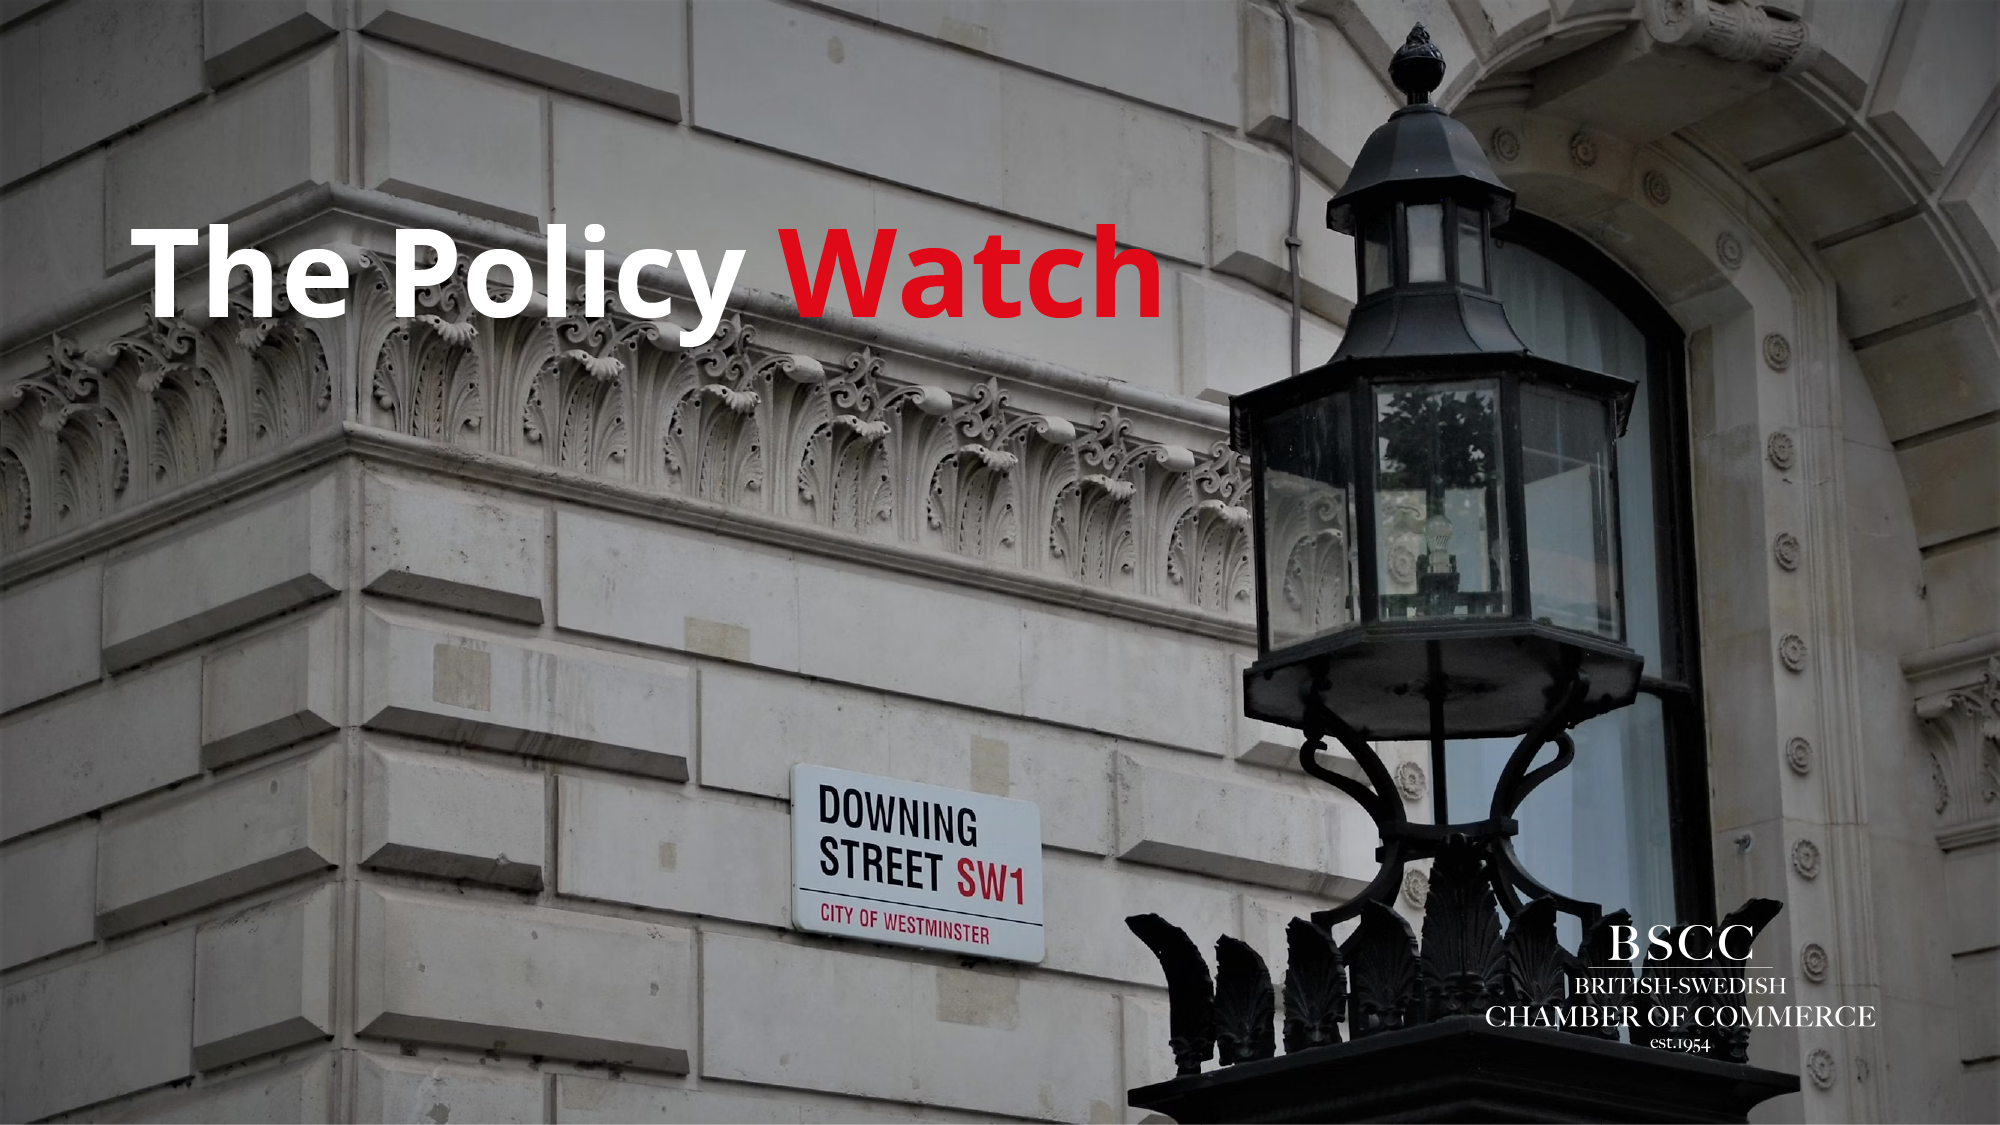 5. The Policy Watch